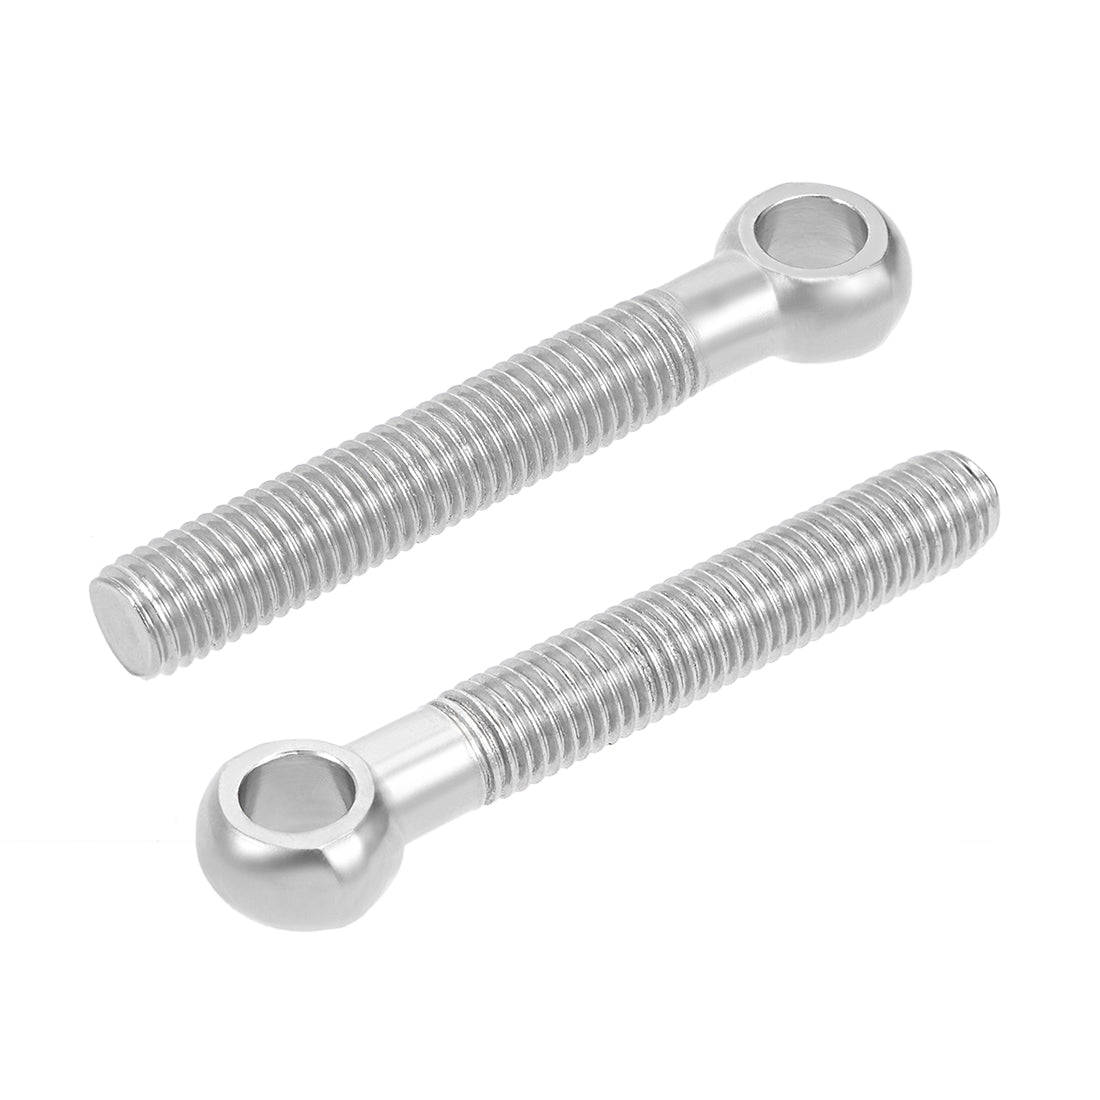 uxcell Uxcell M12 x 80mm 304 Stainless Steel Machine Shoulder Lift Eye Bolt Rigging 10pcs